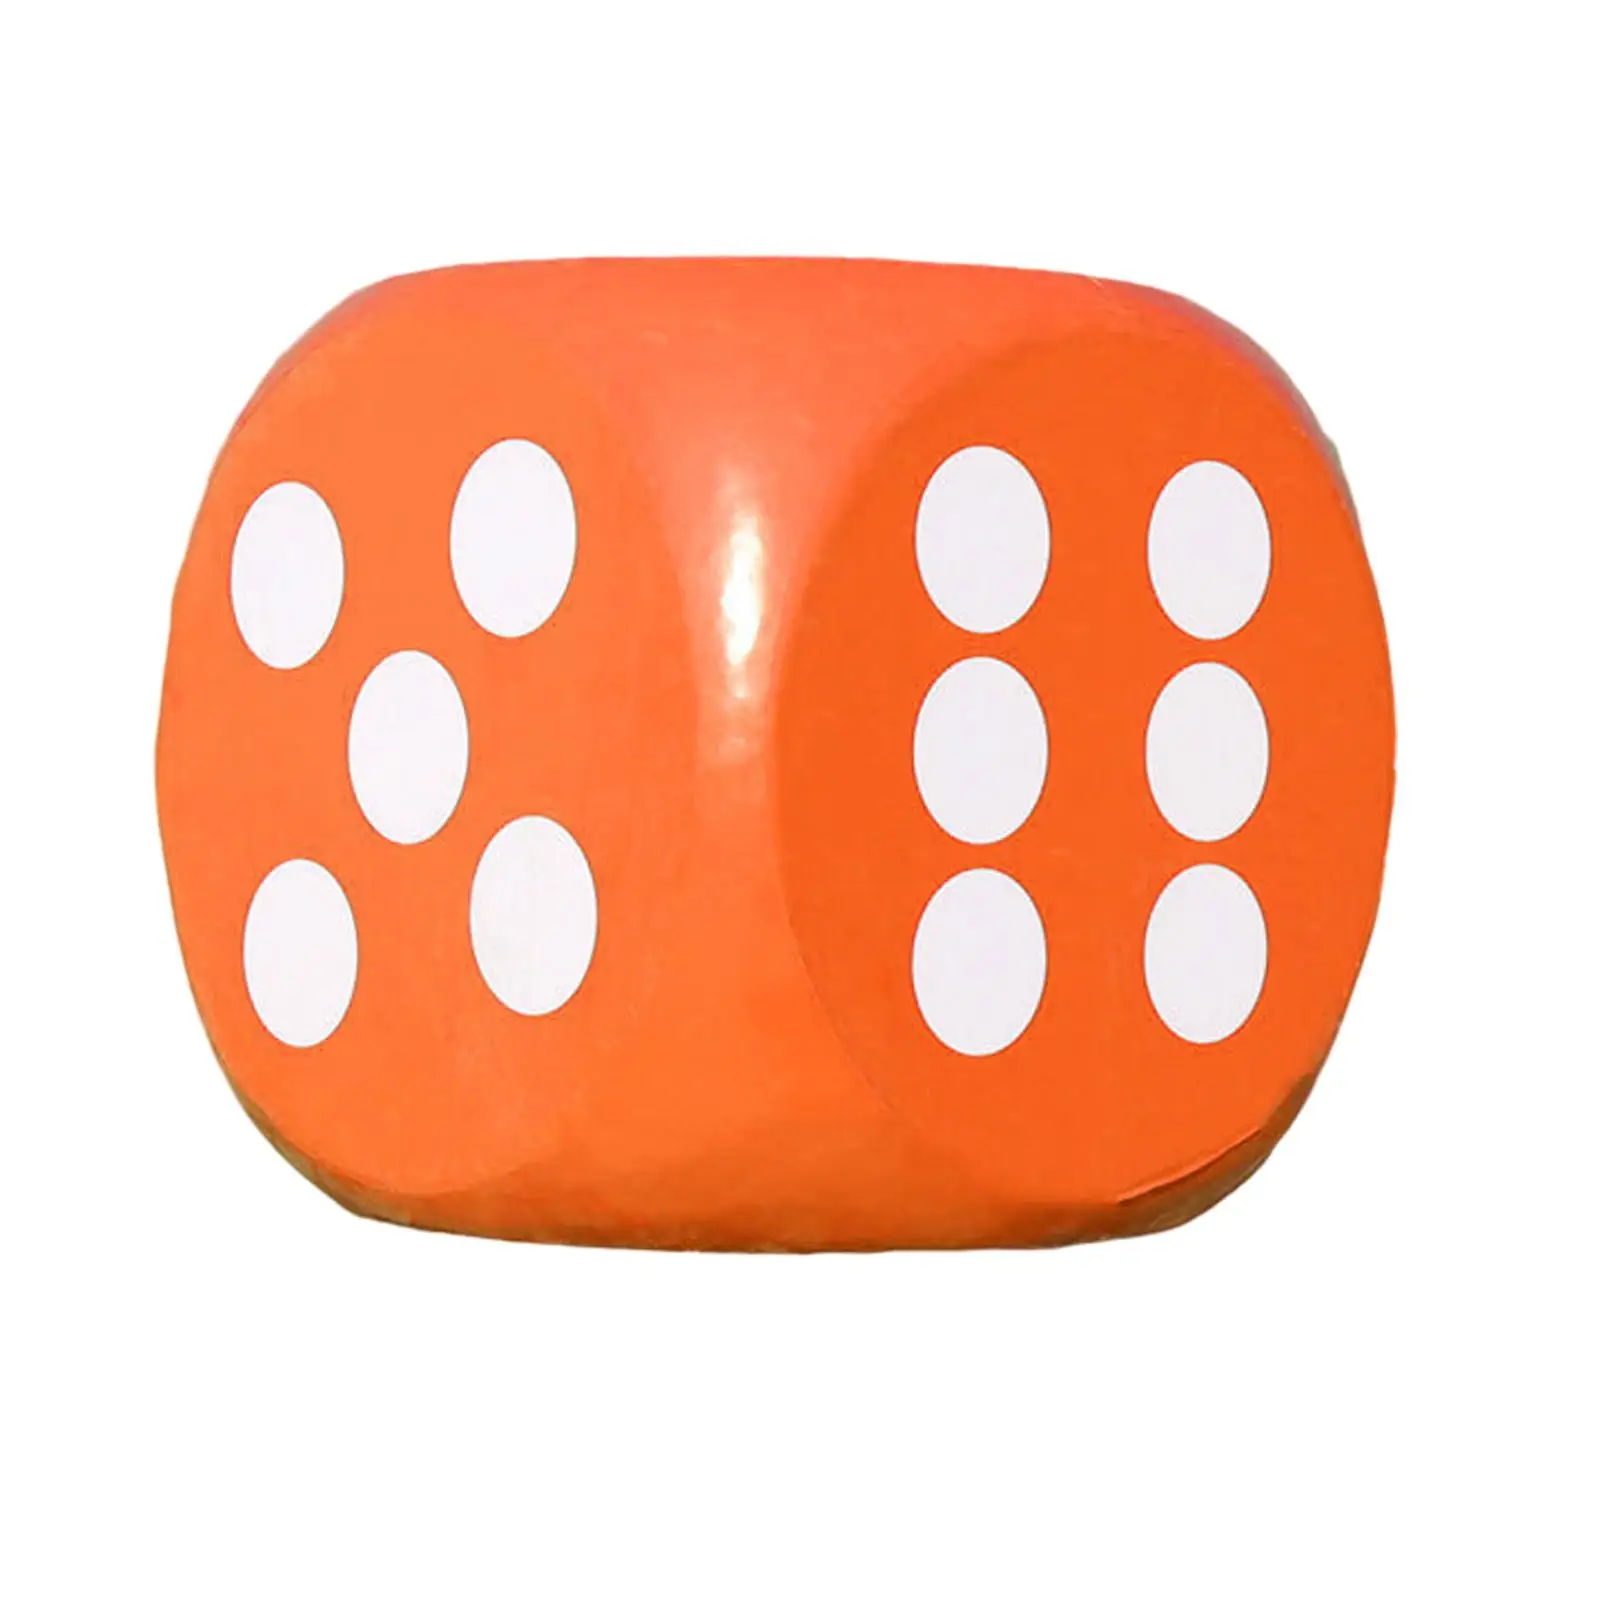 D6 Foam Dice Develop Intelligence Stem Learning Game Dice Dot Dice for Boys and Girls Classroom Kids Carnival School Supplies